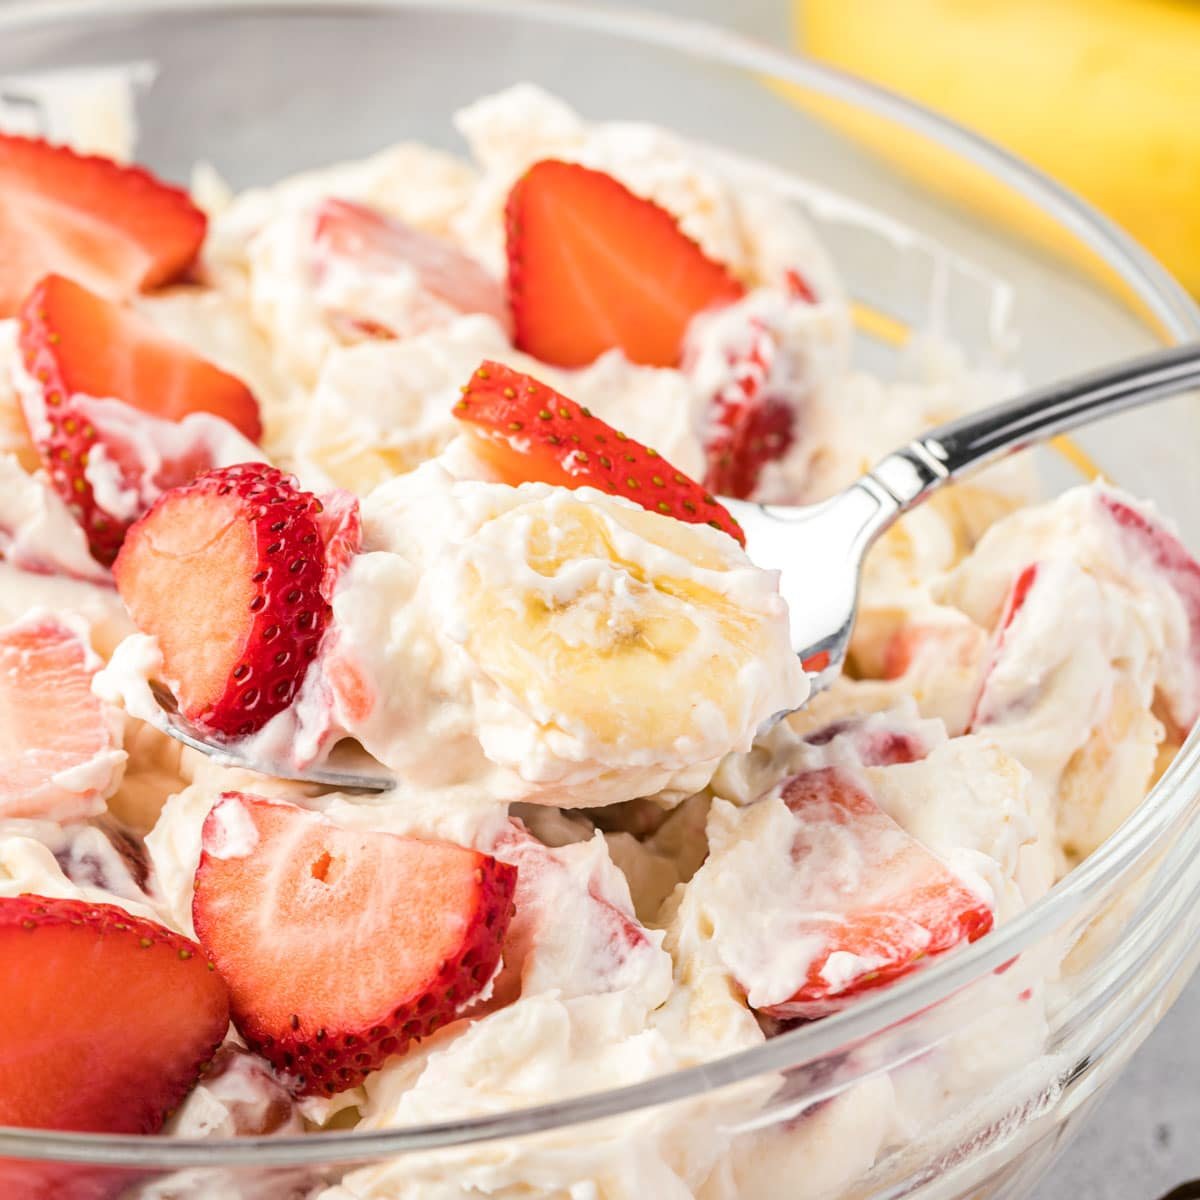 An individual parfait dish with strawberry cheesecake salad with a spoon dipping in.